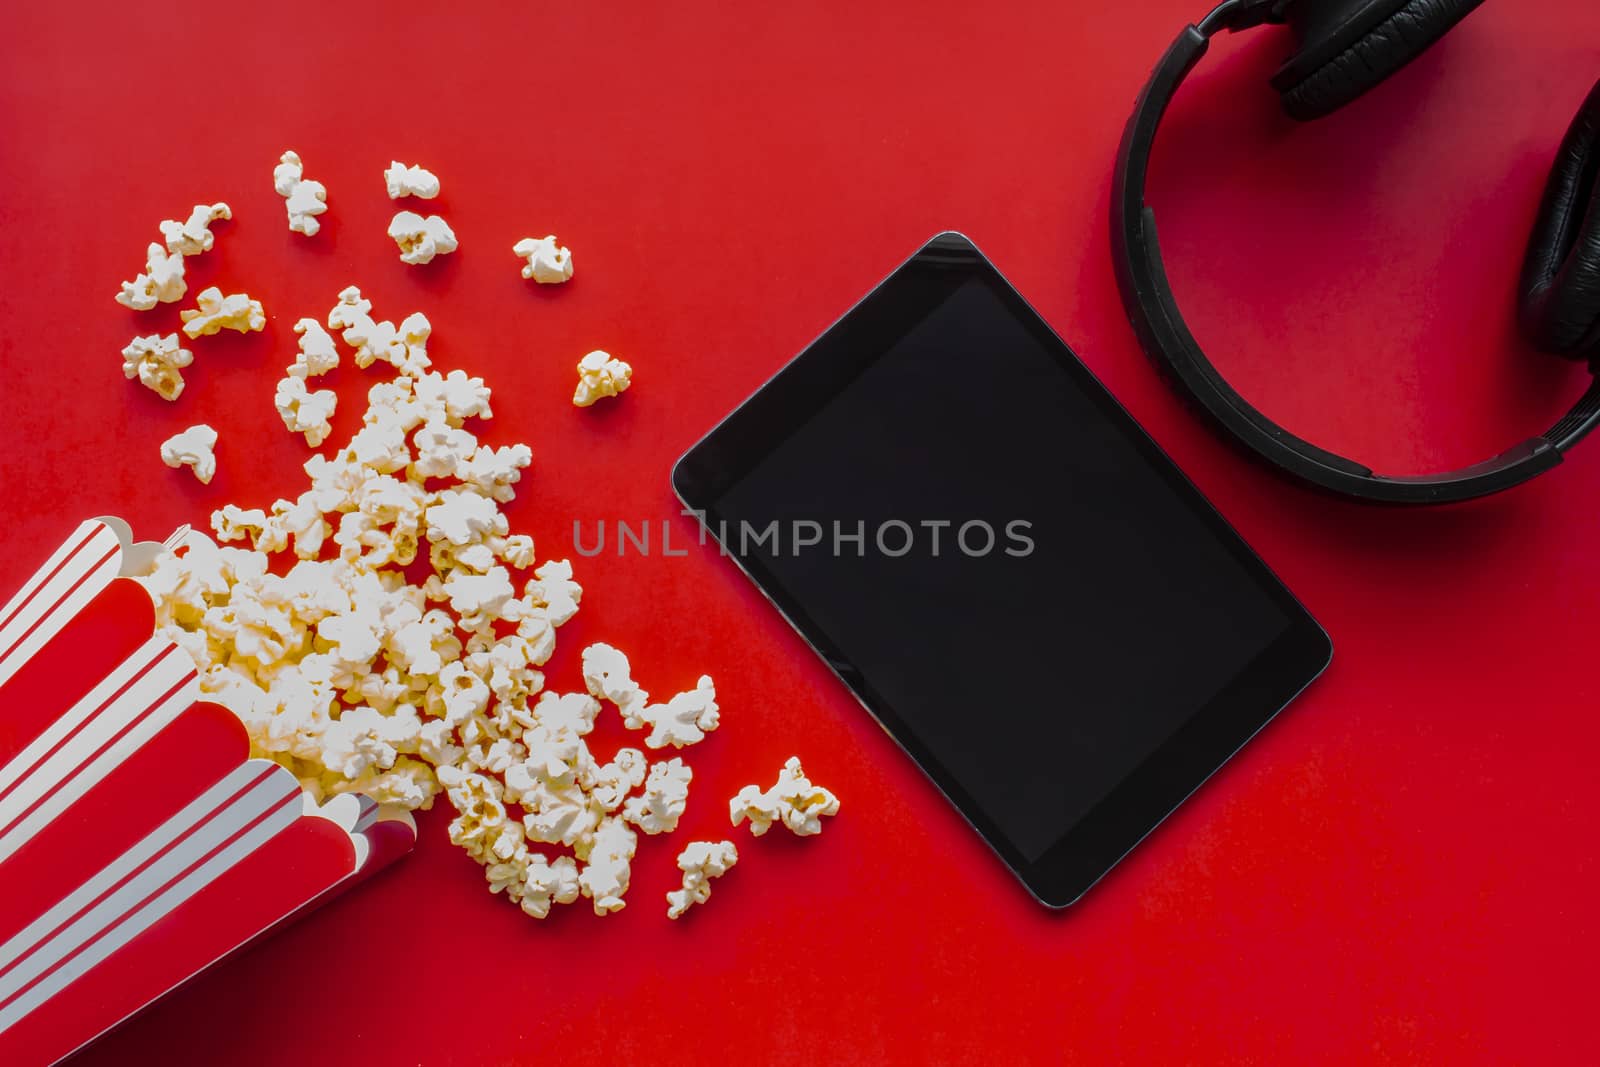 A tablet on a red background with popcorn and headphones by oasisamuel